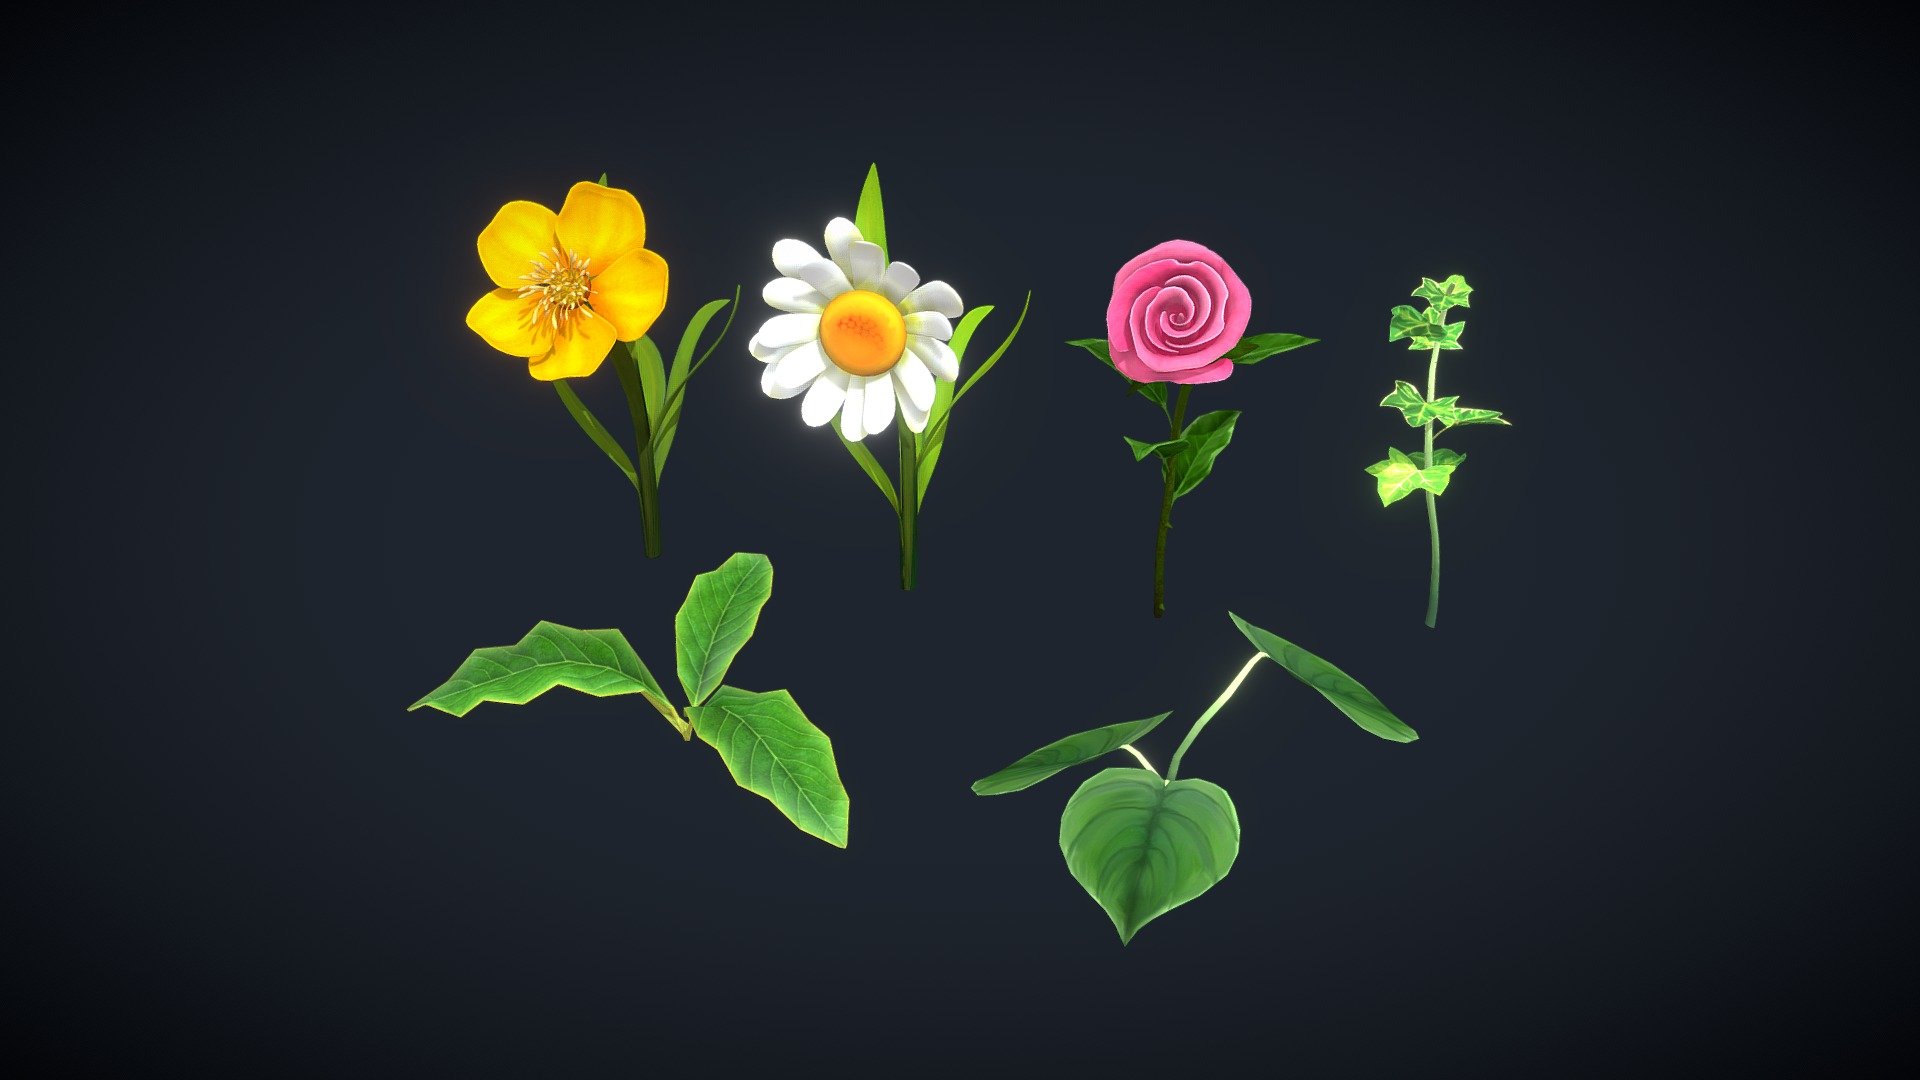 Stylized plants : Flower and grass toon textures
Albedo
Roughness

Free for Personal Projects
..........
Follow me for more free Objects

Contact me if you need custome models : Sunghyogun(@)gmail(.)com - Stylized Plant Pack - Download Free 3D model by Marbles studio (@marblesstudio) 3d model